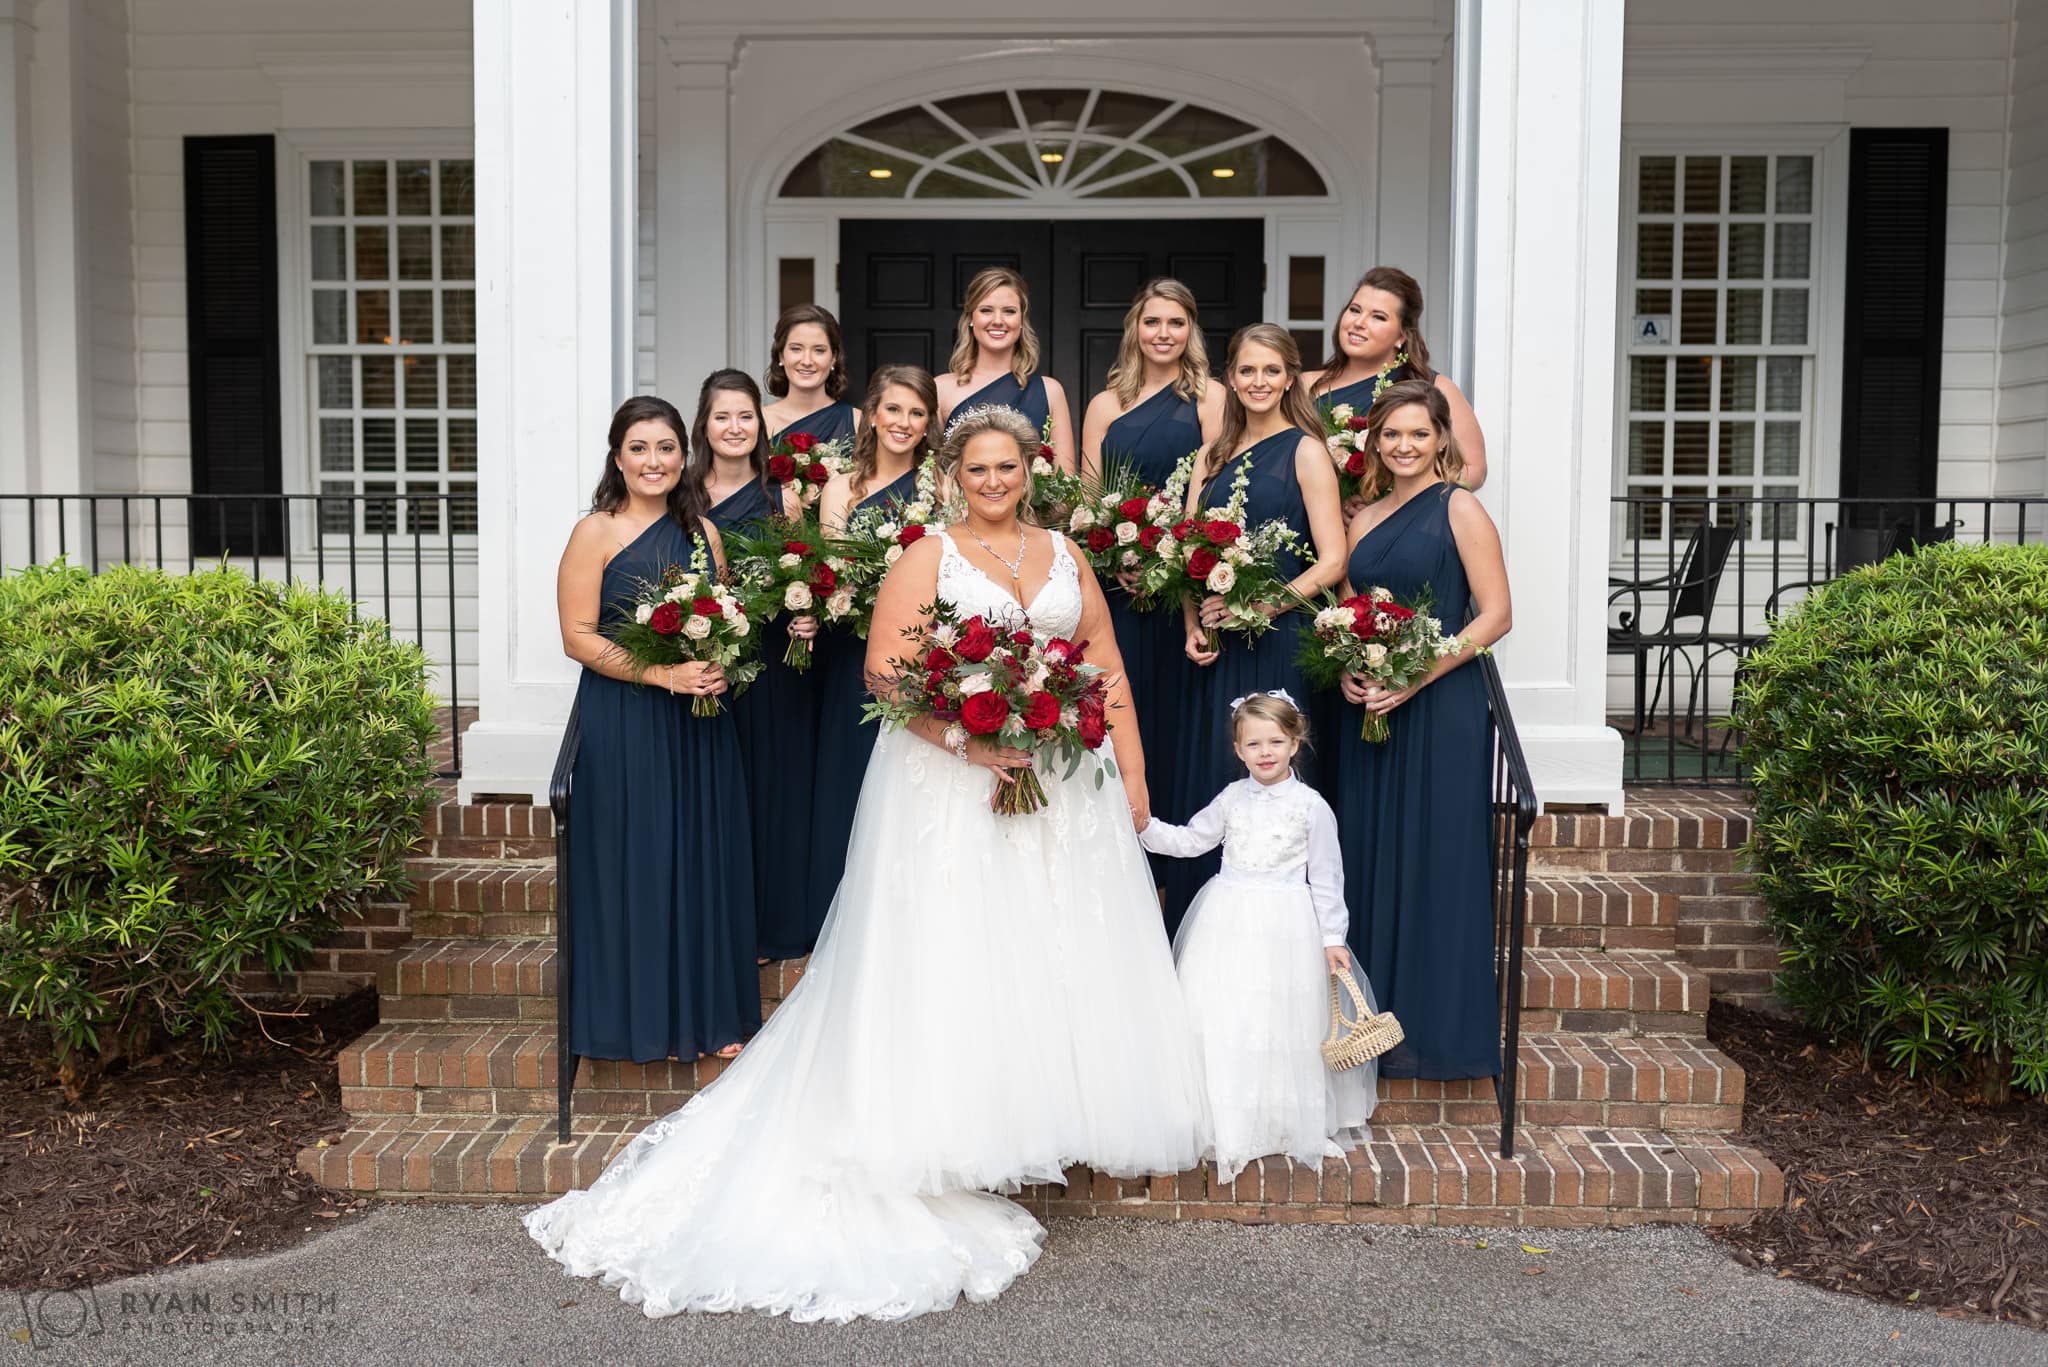 Bride and bridesmaids on the steps together